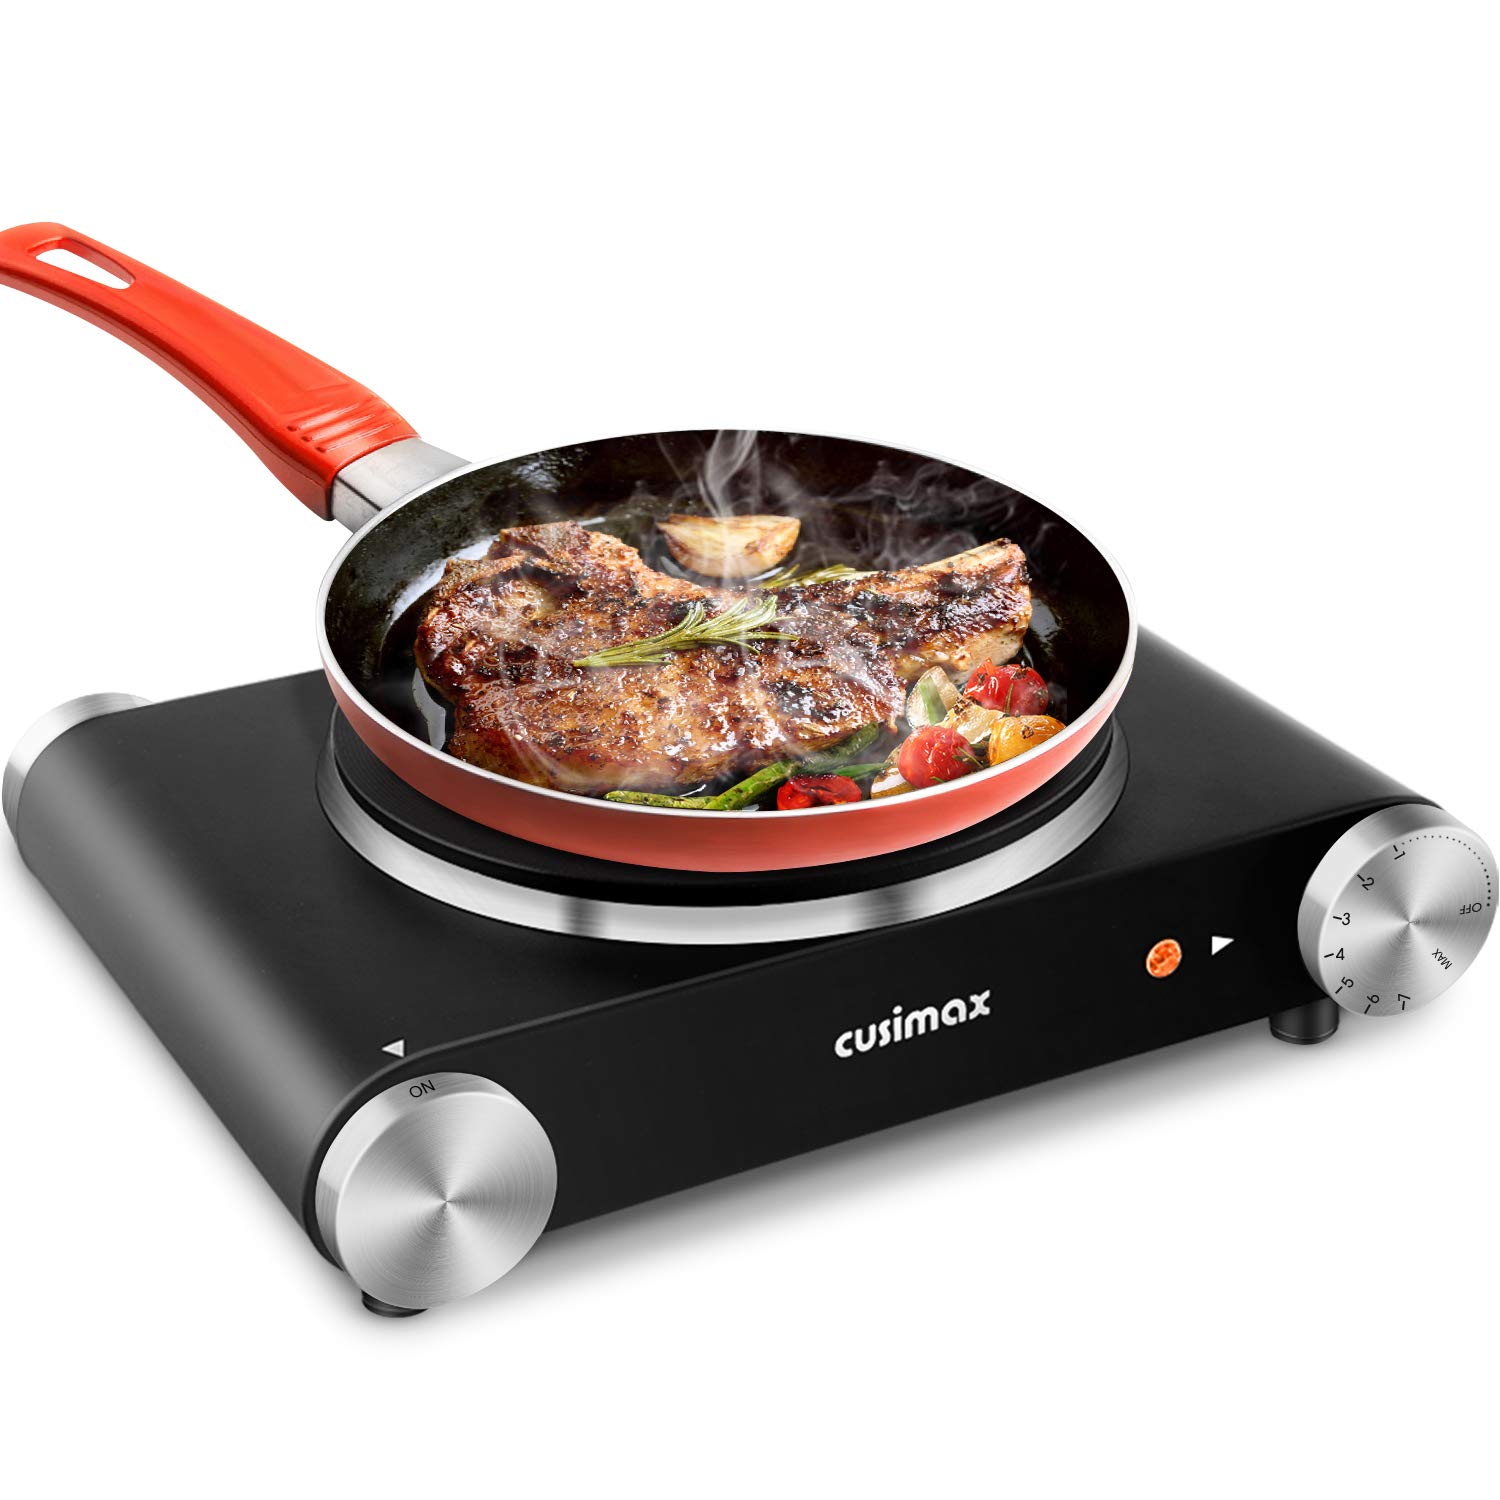 CUSIMAX Electric Burner, Portable Electric Hot Plates for cooking Countertop Electric Cooktop